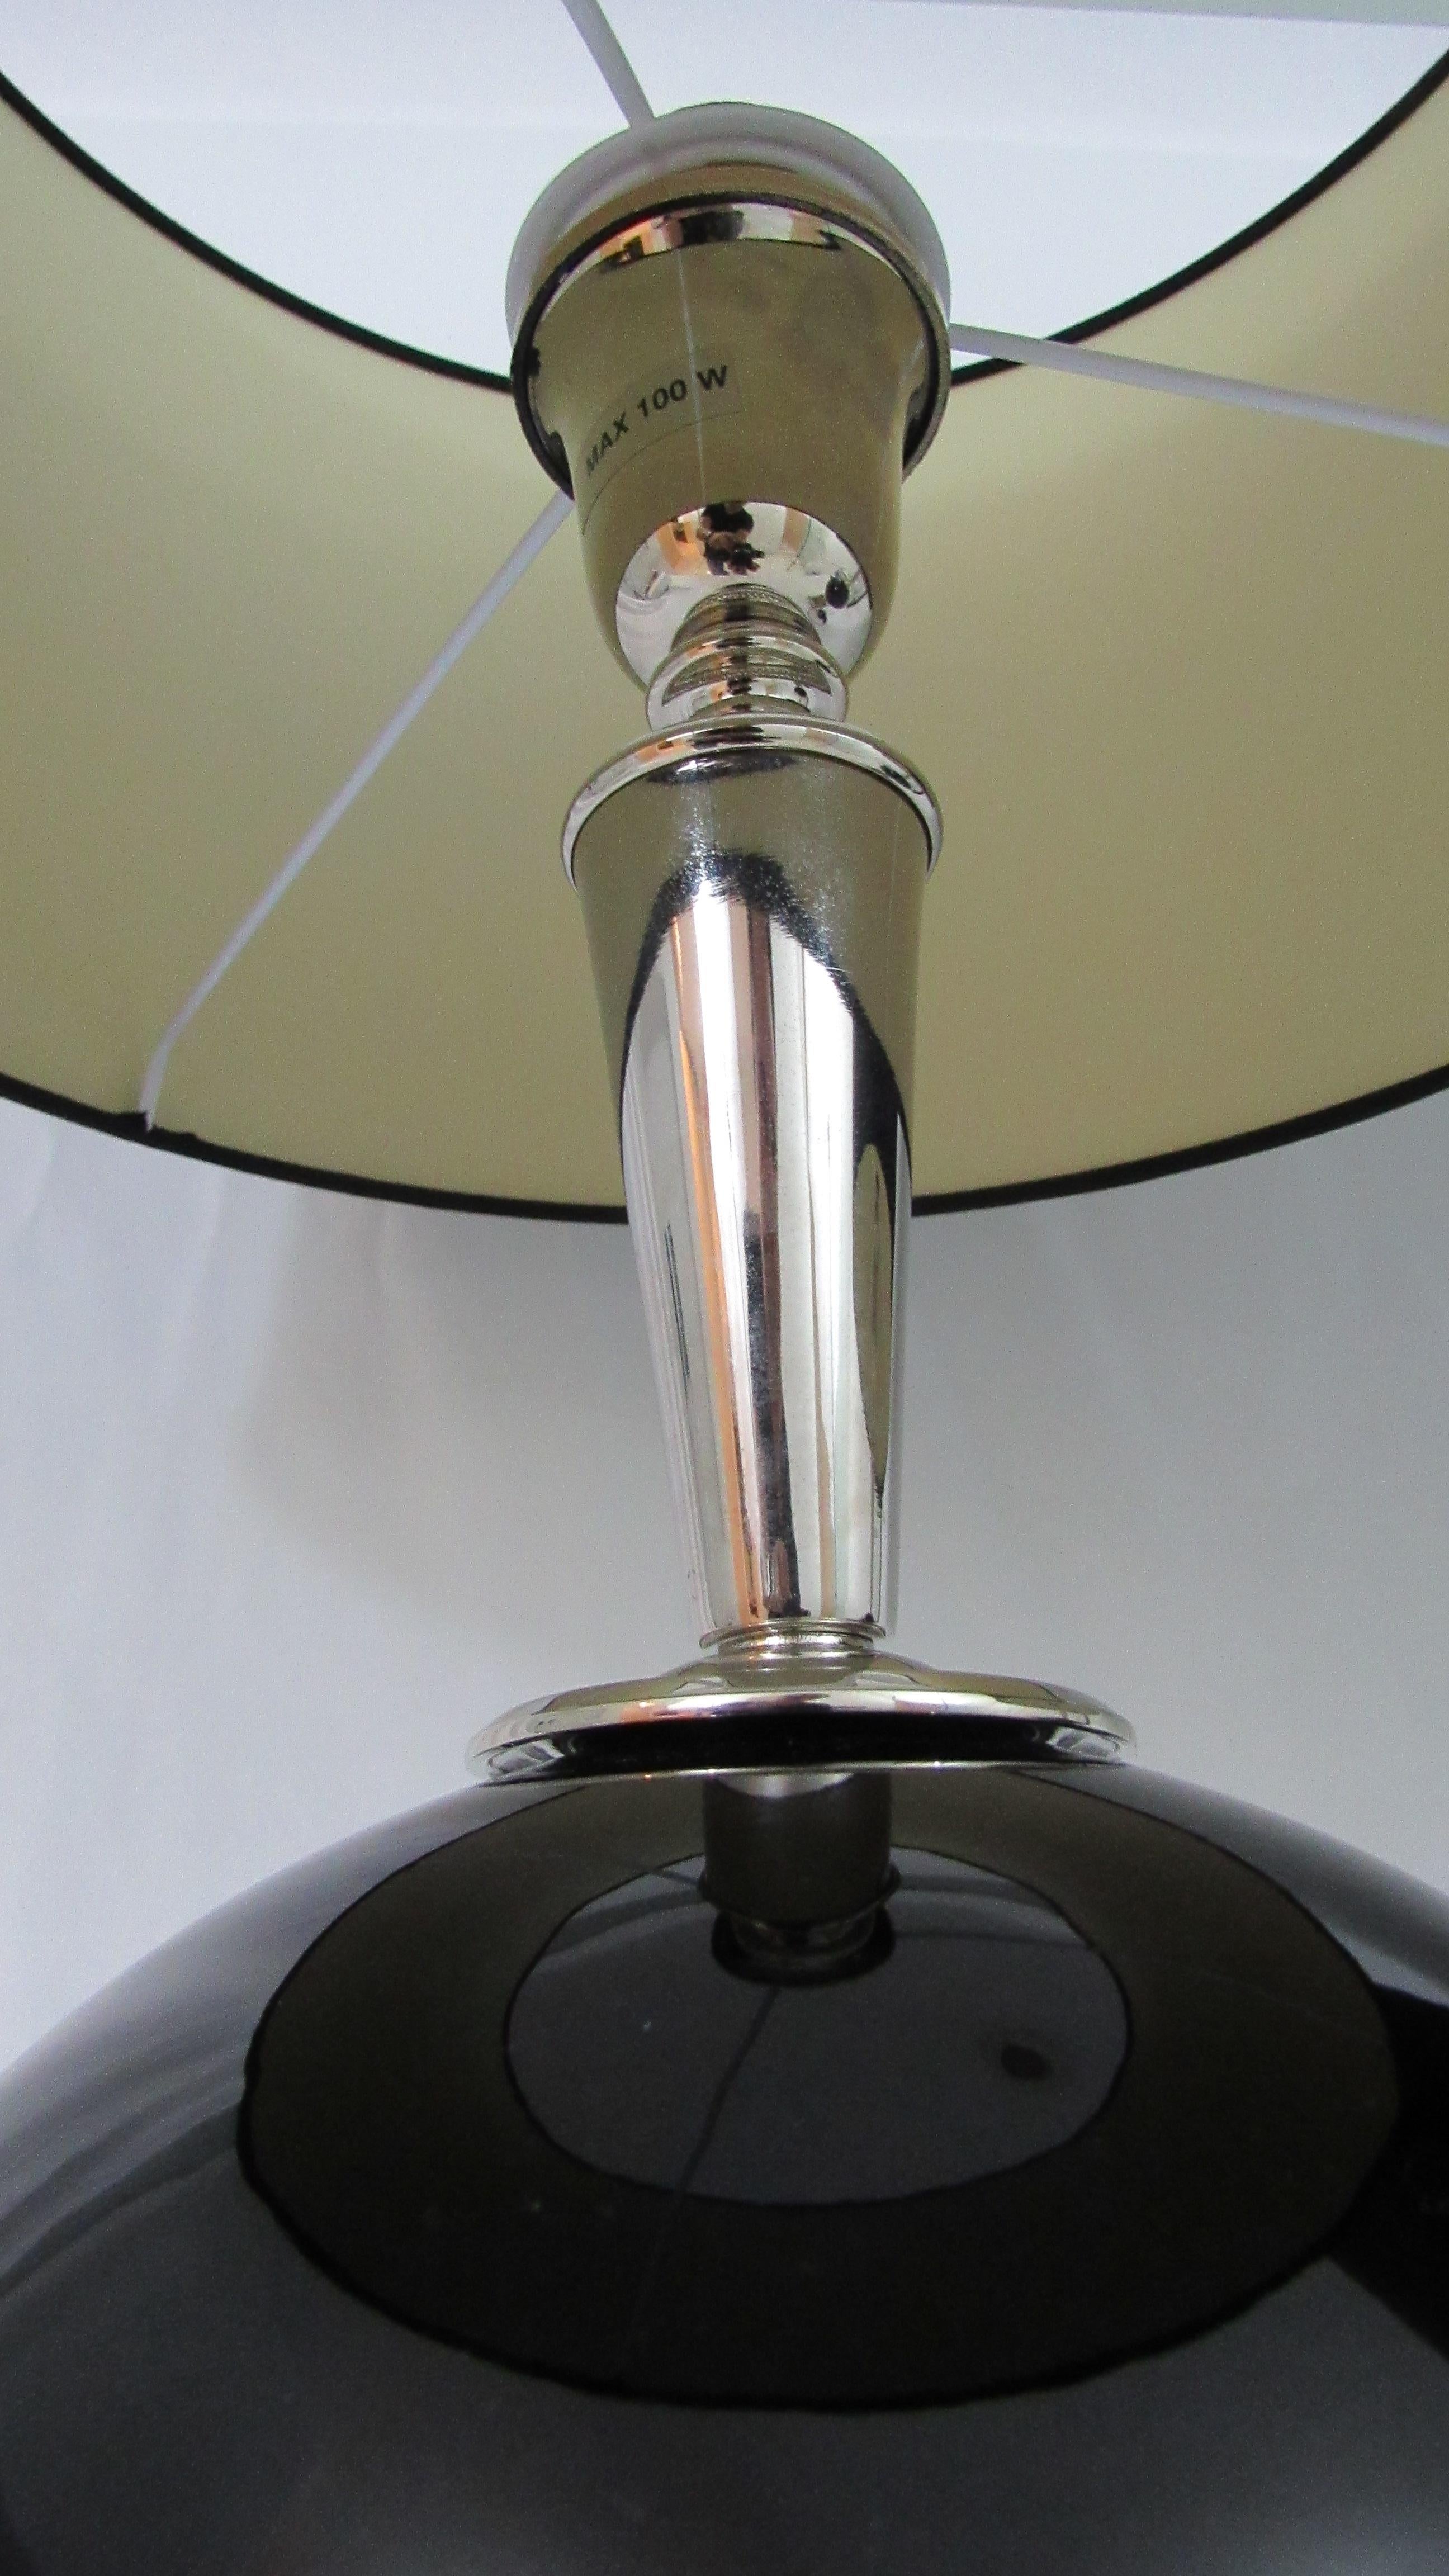 Laudarte Srl Lume Yago Table Lamp in Nickel and Glass In New Condition For Sale In Miami, FL